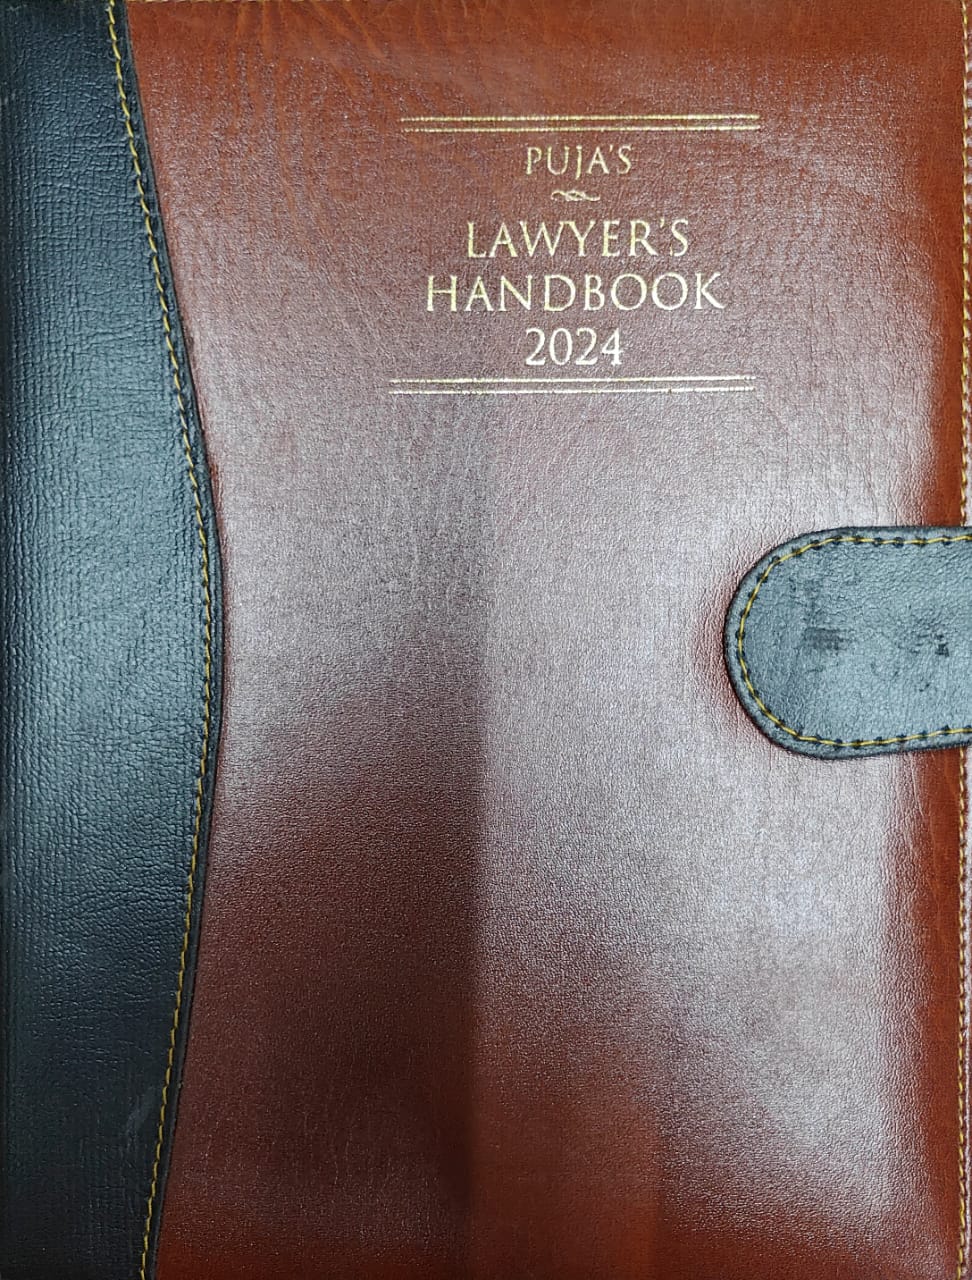 Puja Lawyer Handbook 2024 - Golden Executive Big Size with Button